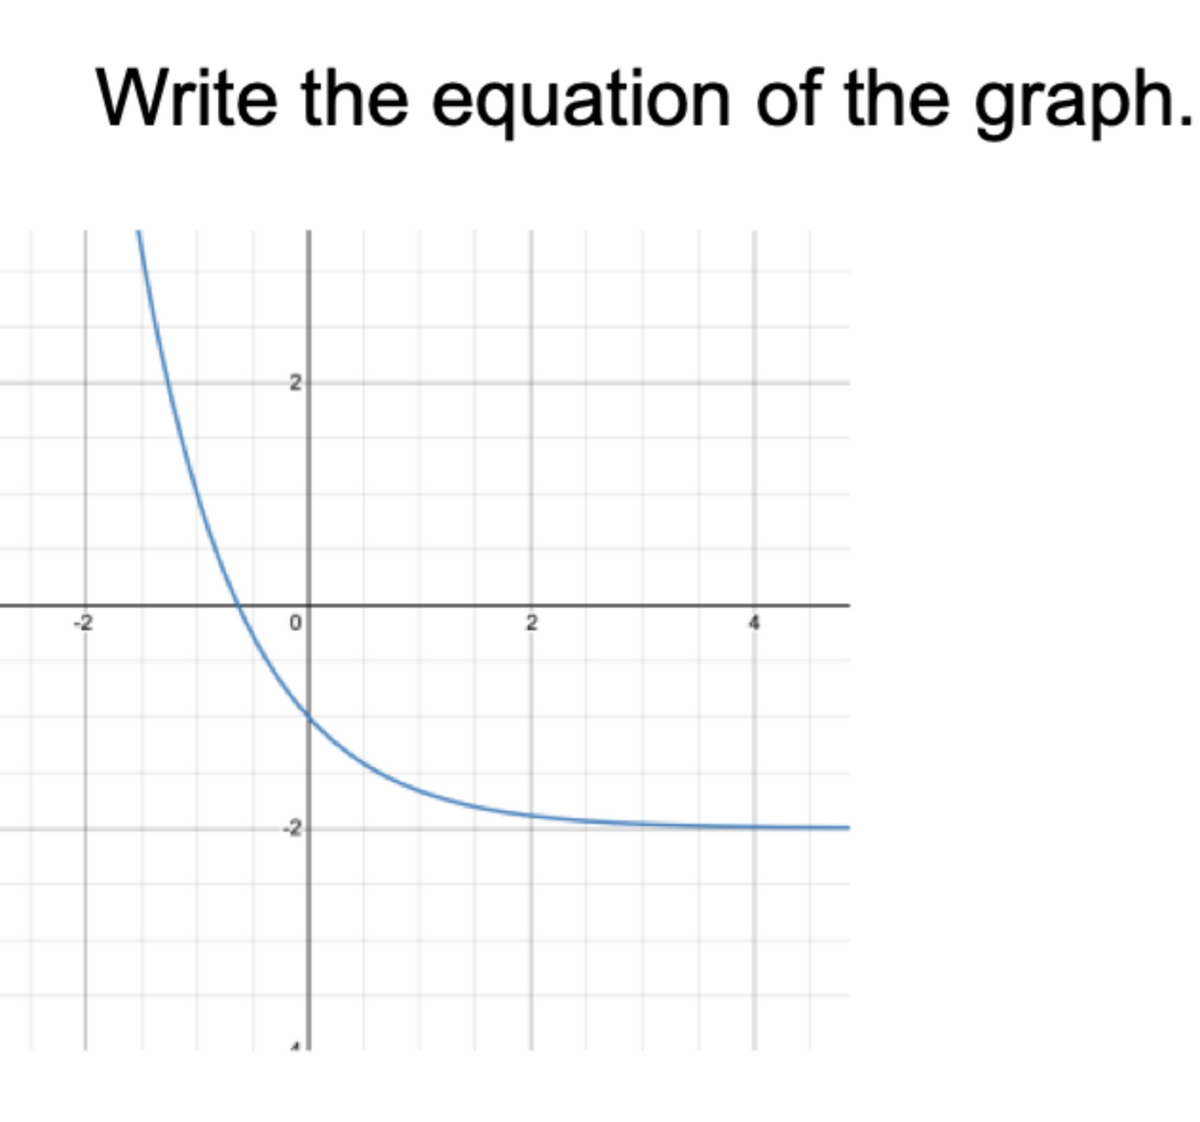 Write the equation of the graph.
2
0
-2
2